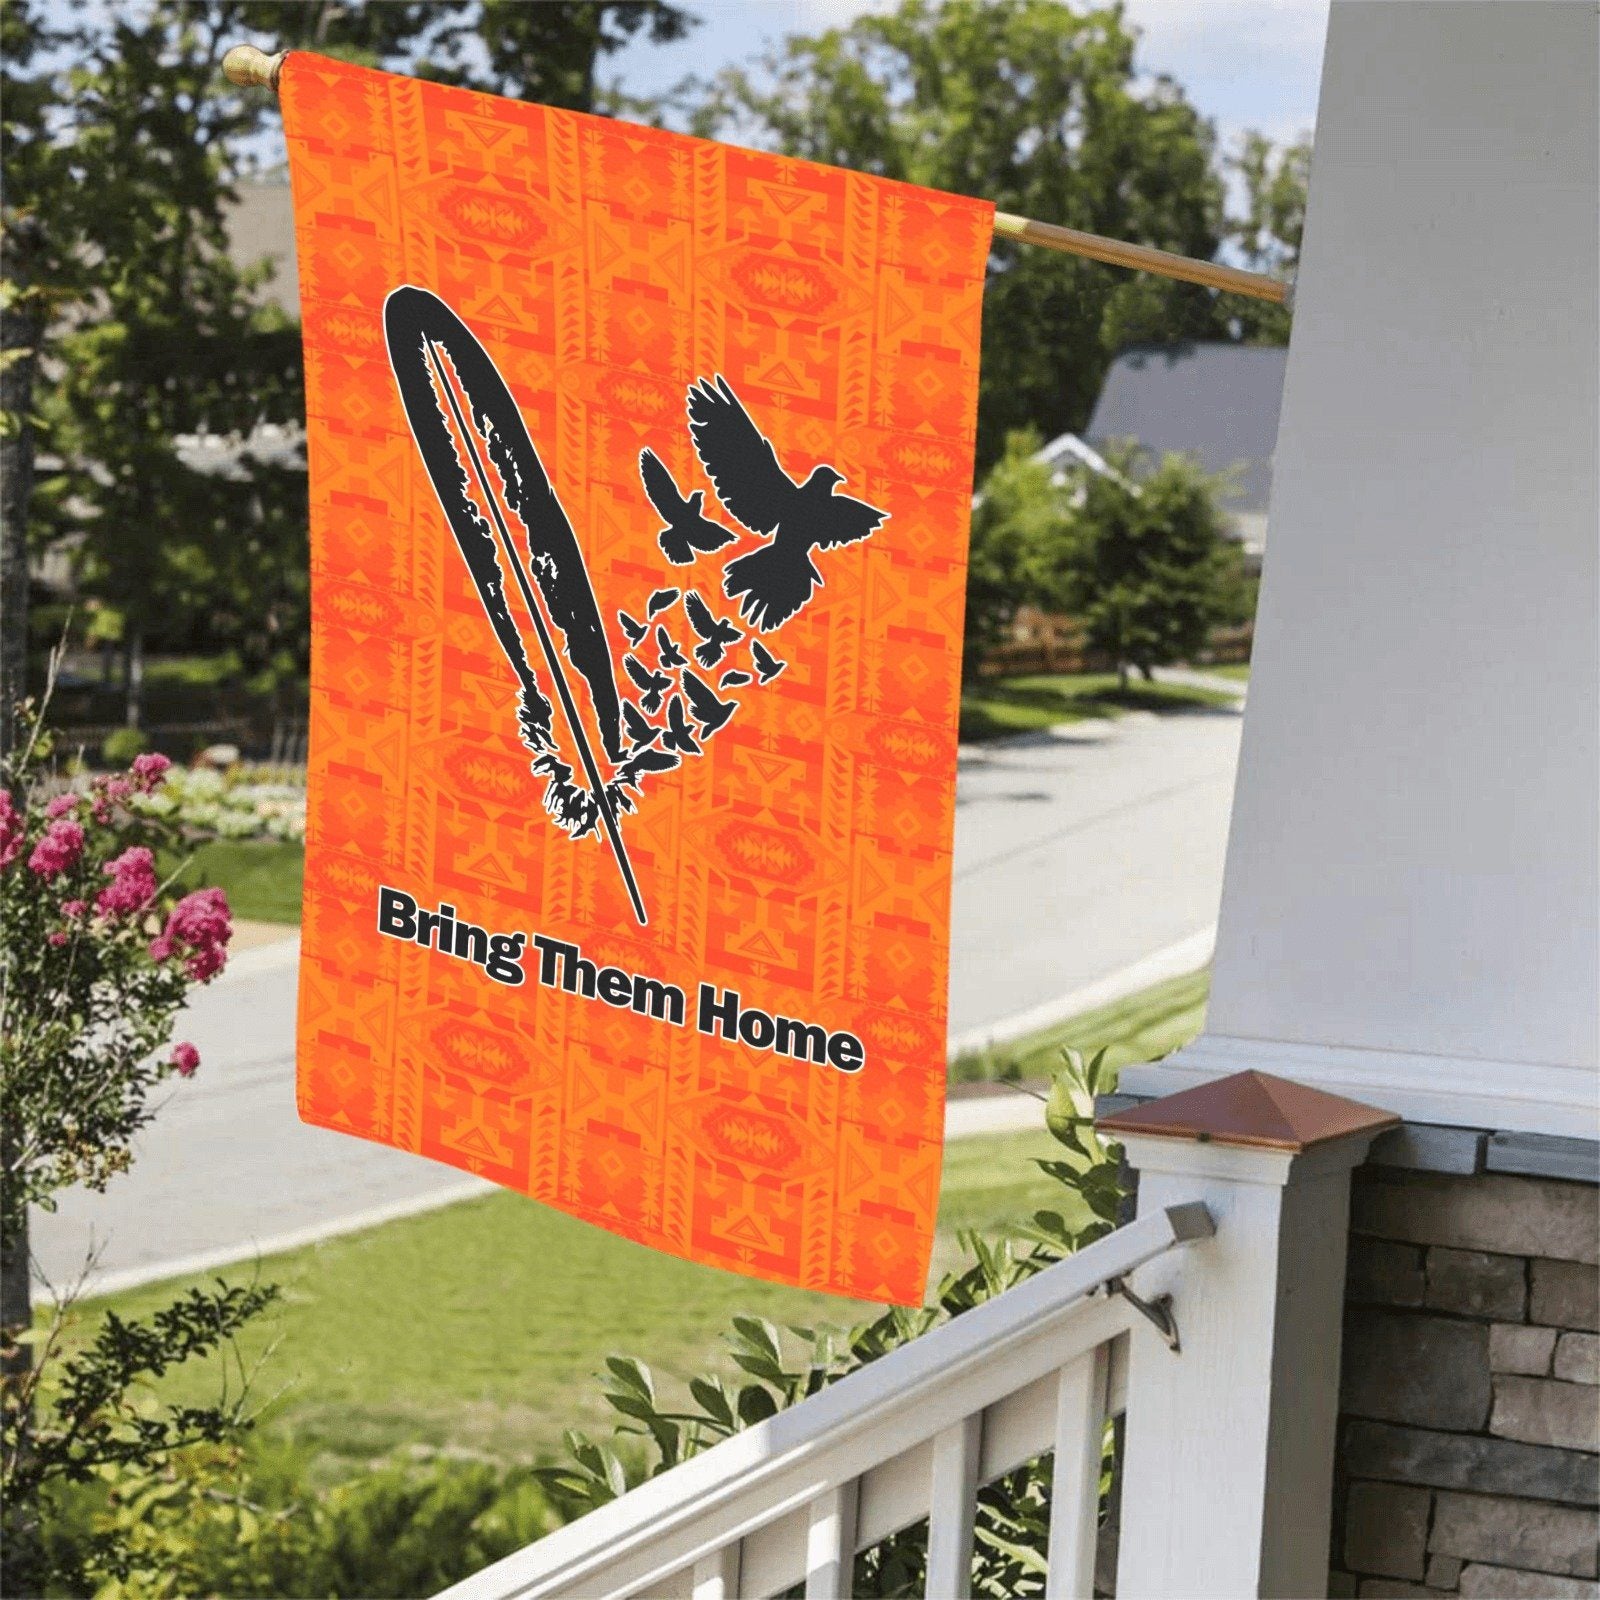 Chiefs Mountain Orange - Bring Them Home Feather with Doves Garden Flag 36''x60'' (Two Sides Printing) Garden Flag 36‘’x60‘’ (Two Sides) e-joyer 